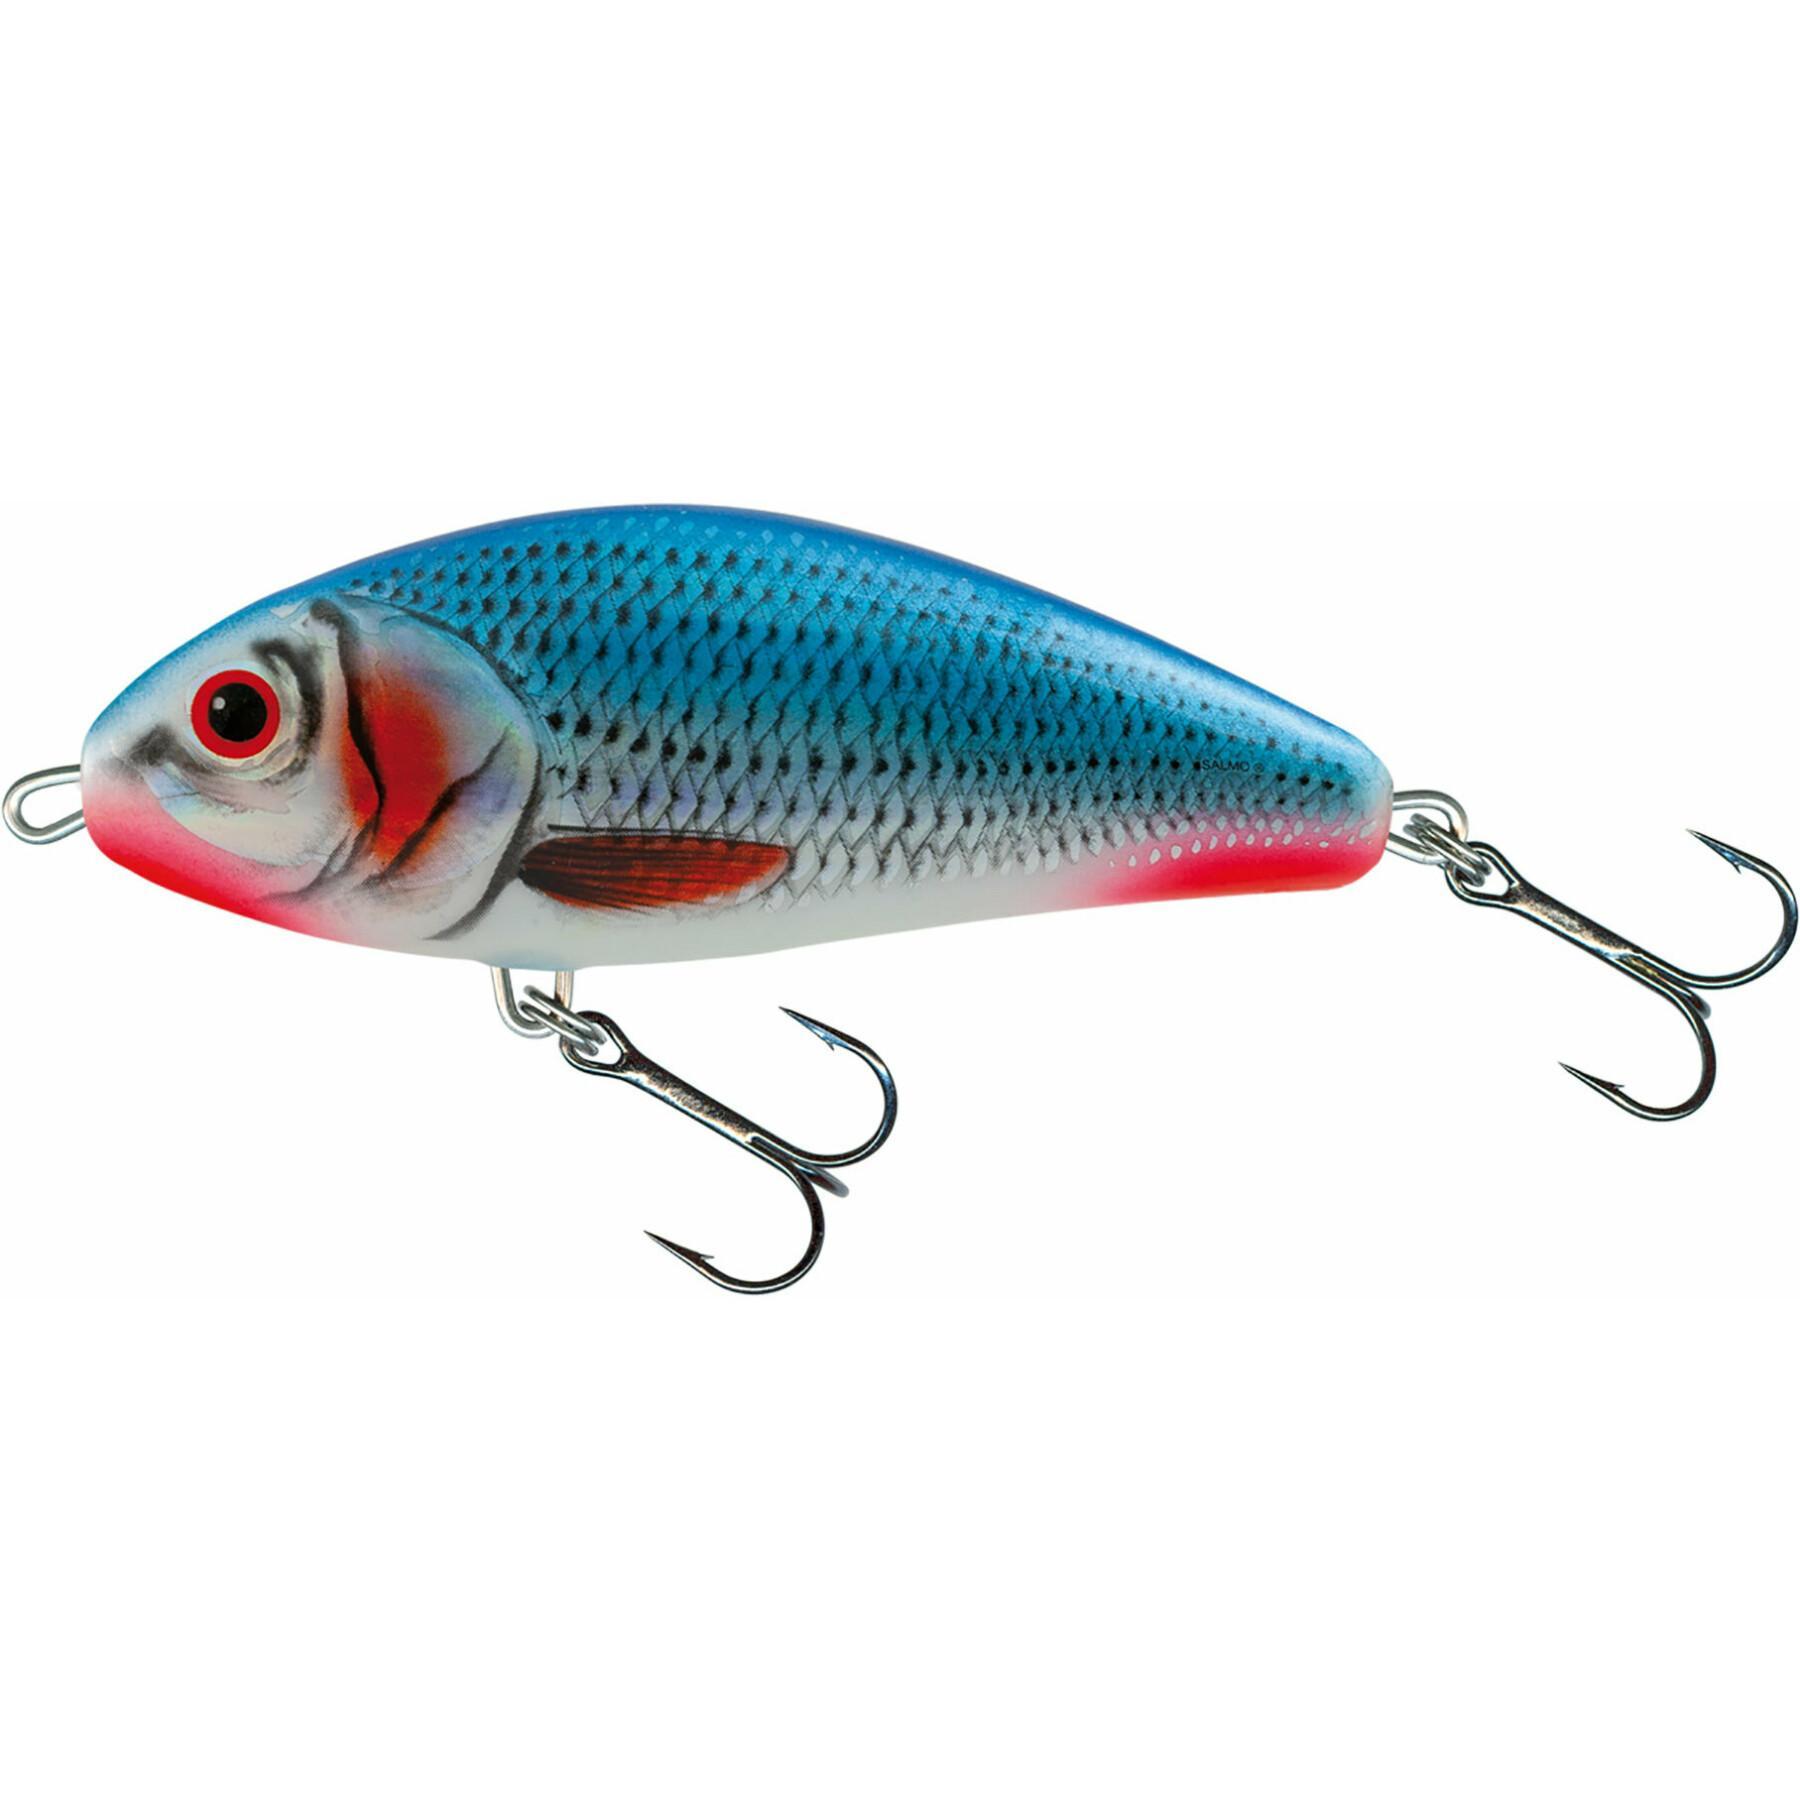 Sinking lure Salmo fatso SNK 52g